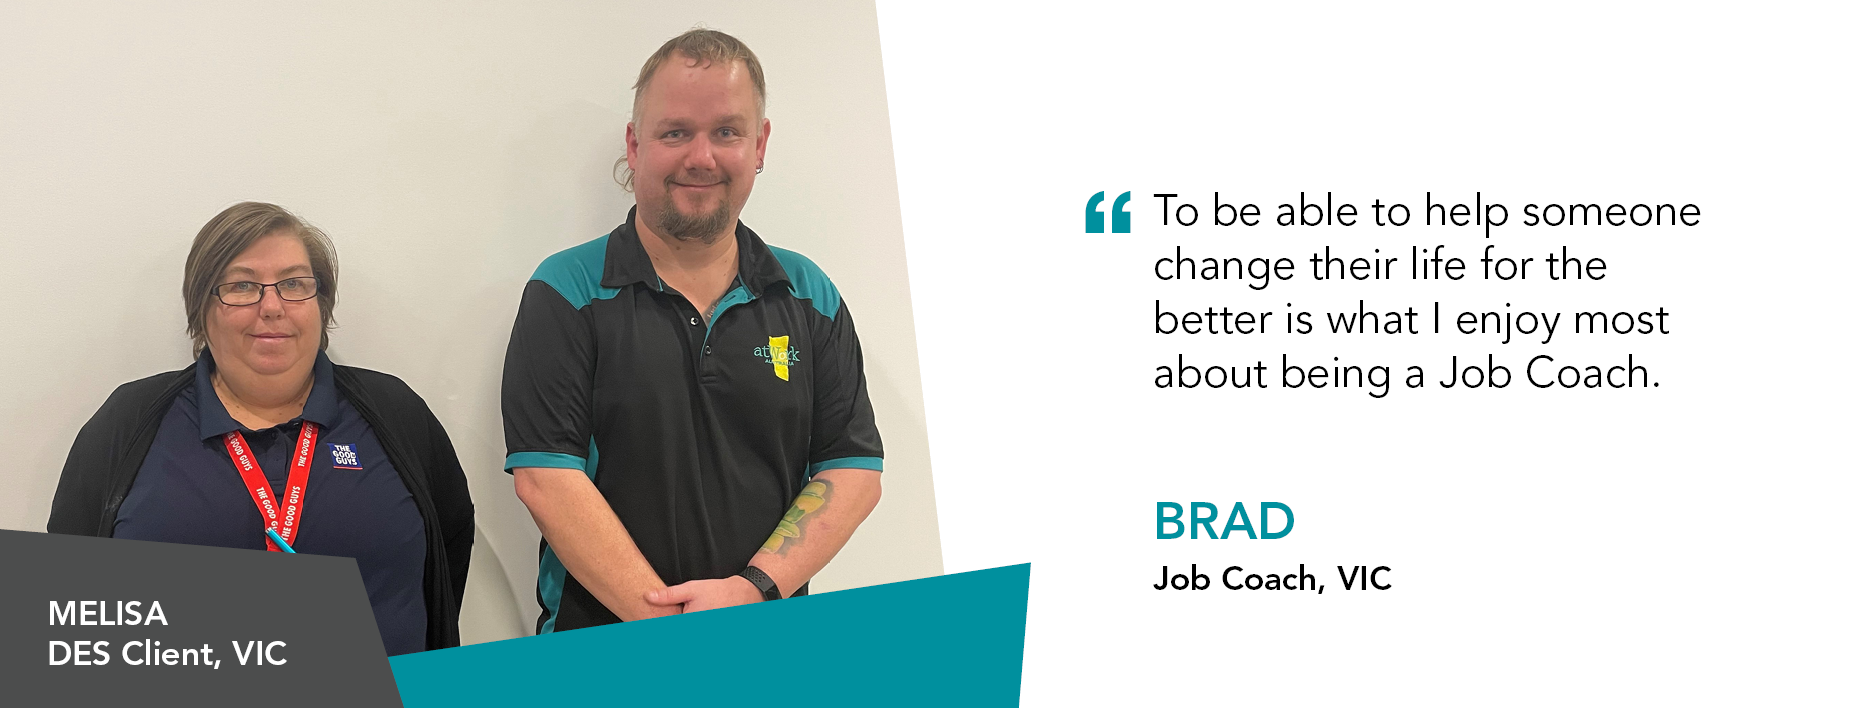 Quote reads "To be able to help someone change their life for the better is what I enjoy most about being a Job Coach," said Brad, Job Coach Victoria